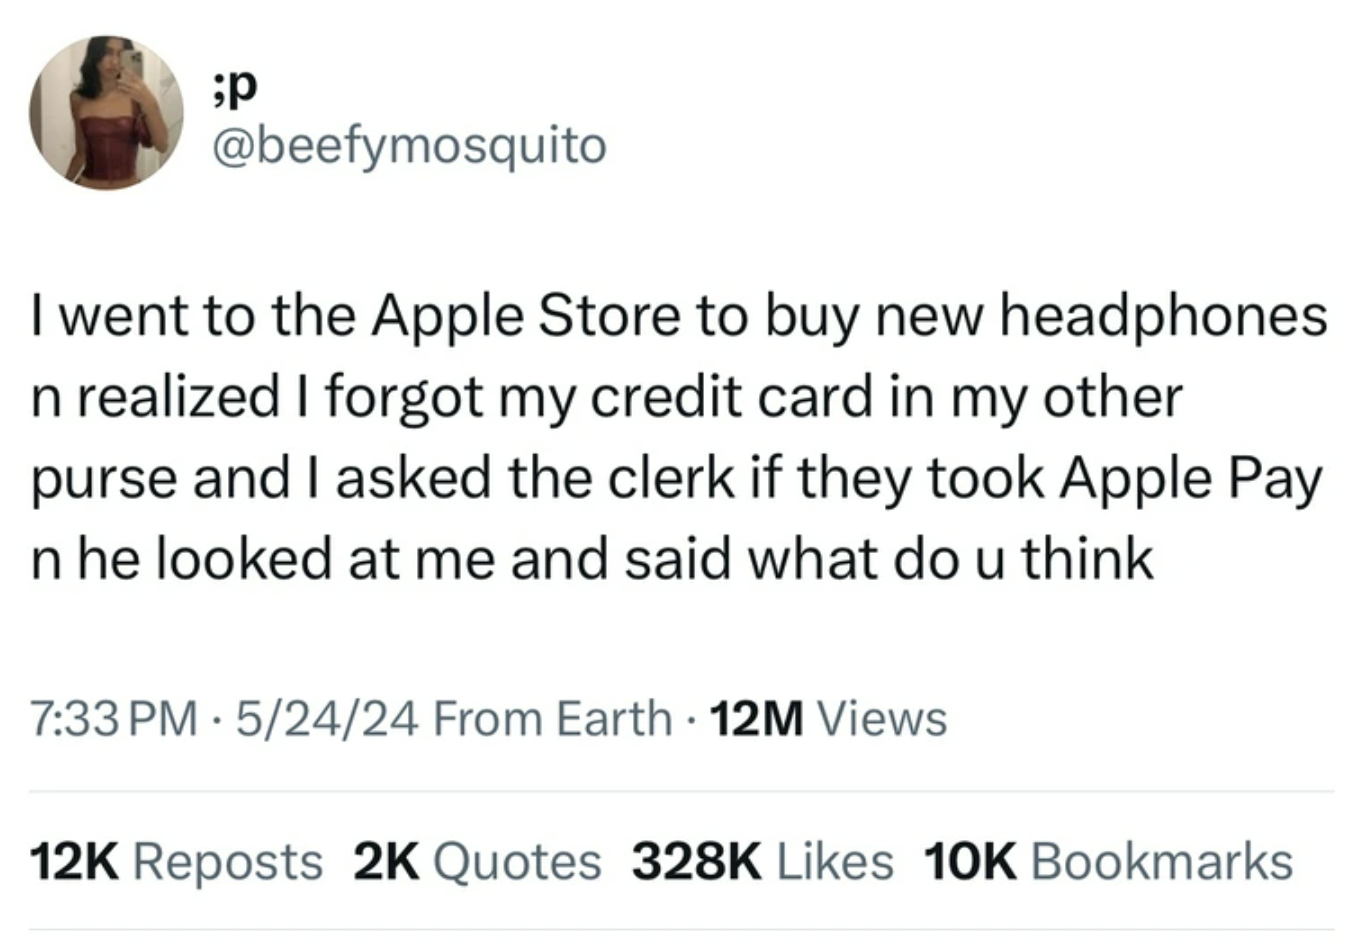 number - ;P I went to the Apple Store to buy new headphones n realized I forgot my credit card in my other purse and I asked the clerk if they took Apple Pay n he looked at me and said what do u think 52424 From Earth 12M Views 12K Reposts 2K Quotes 10K B